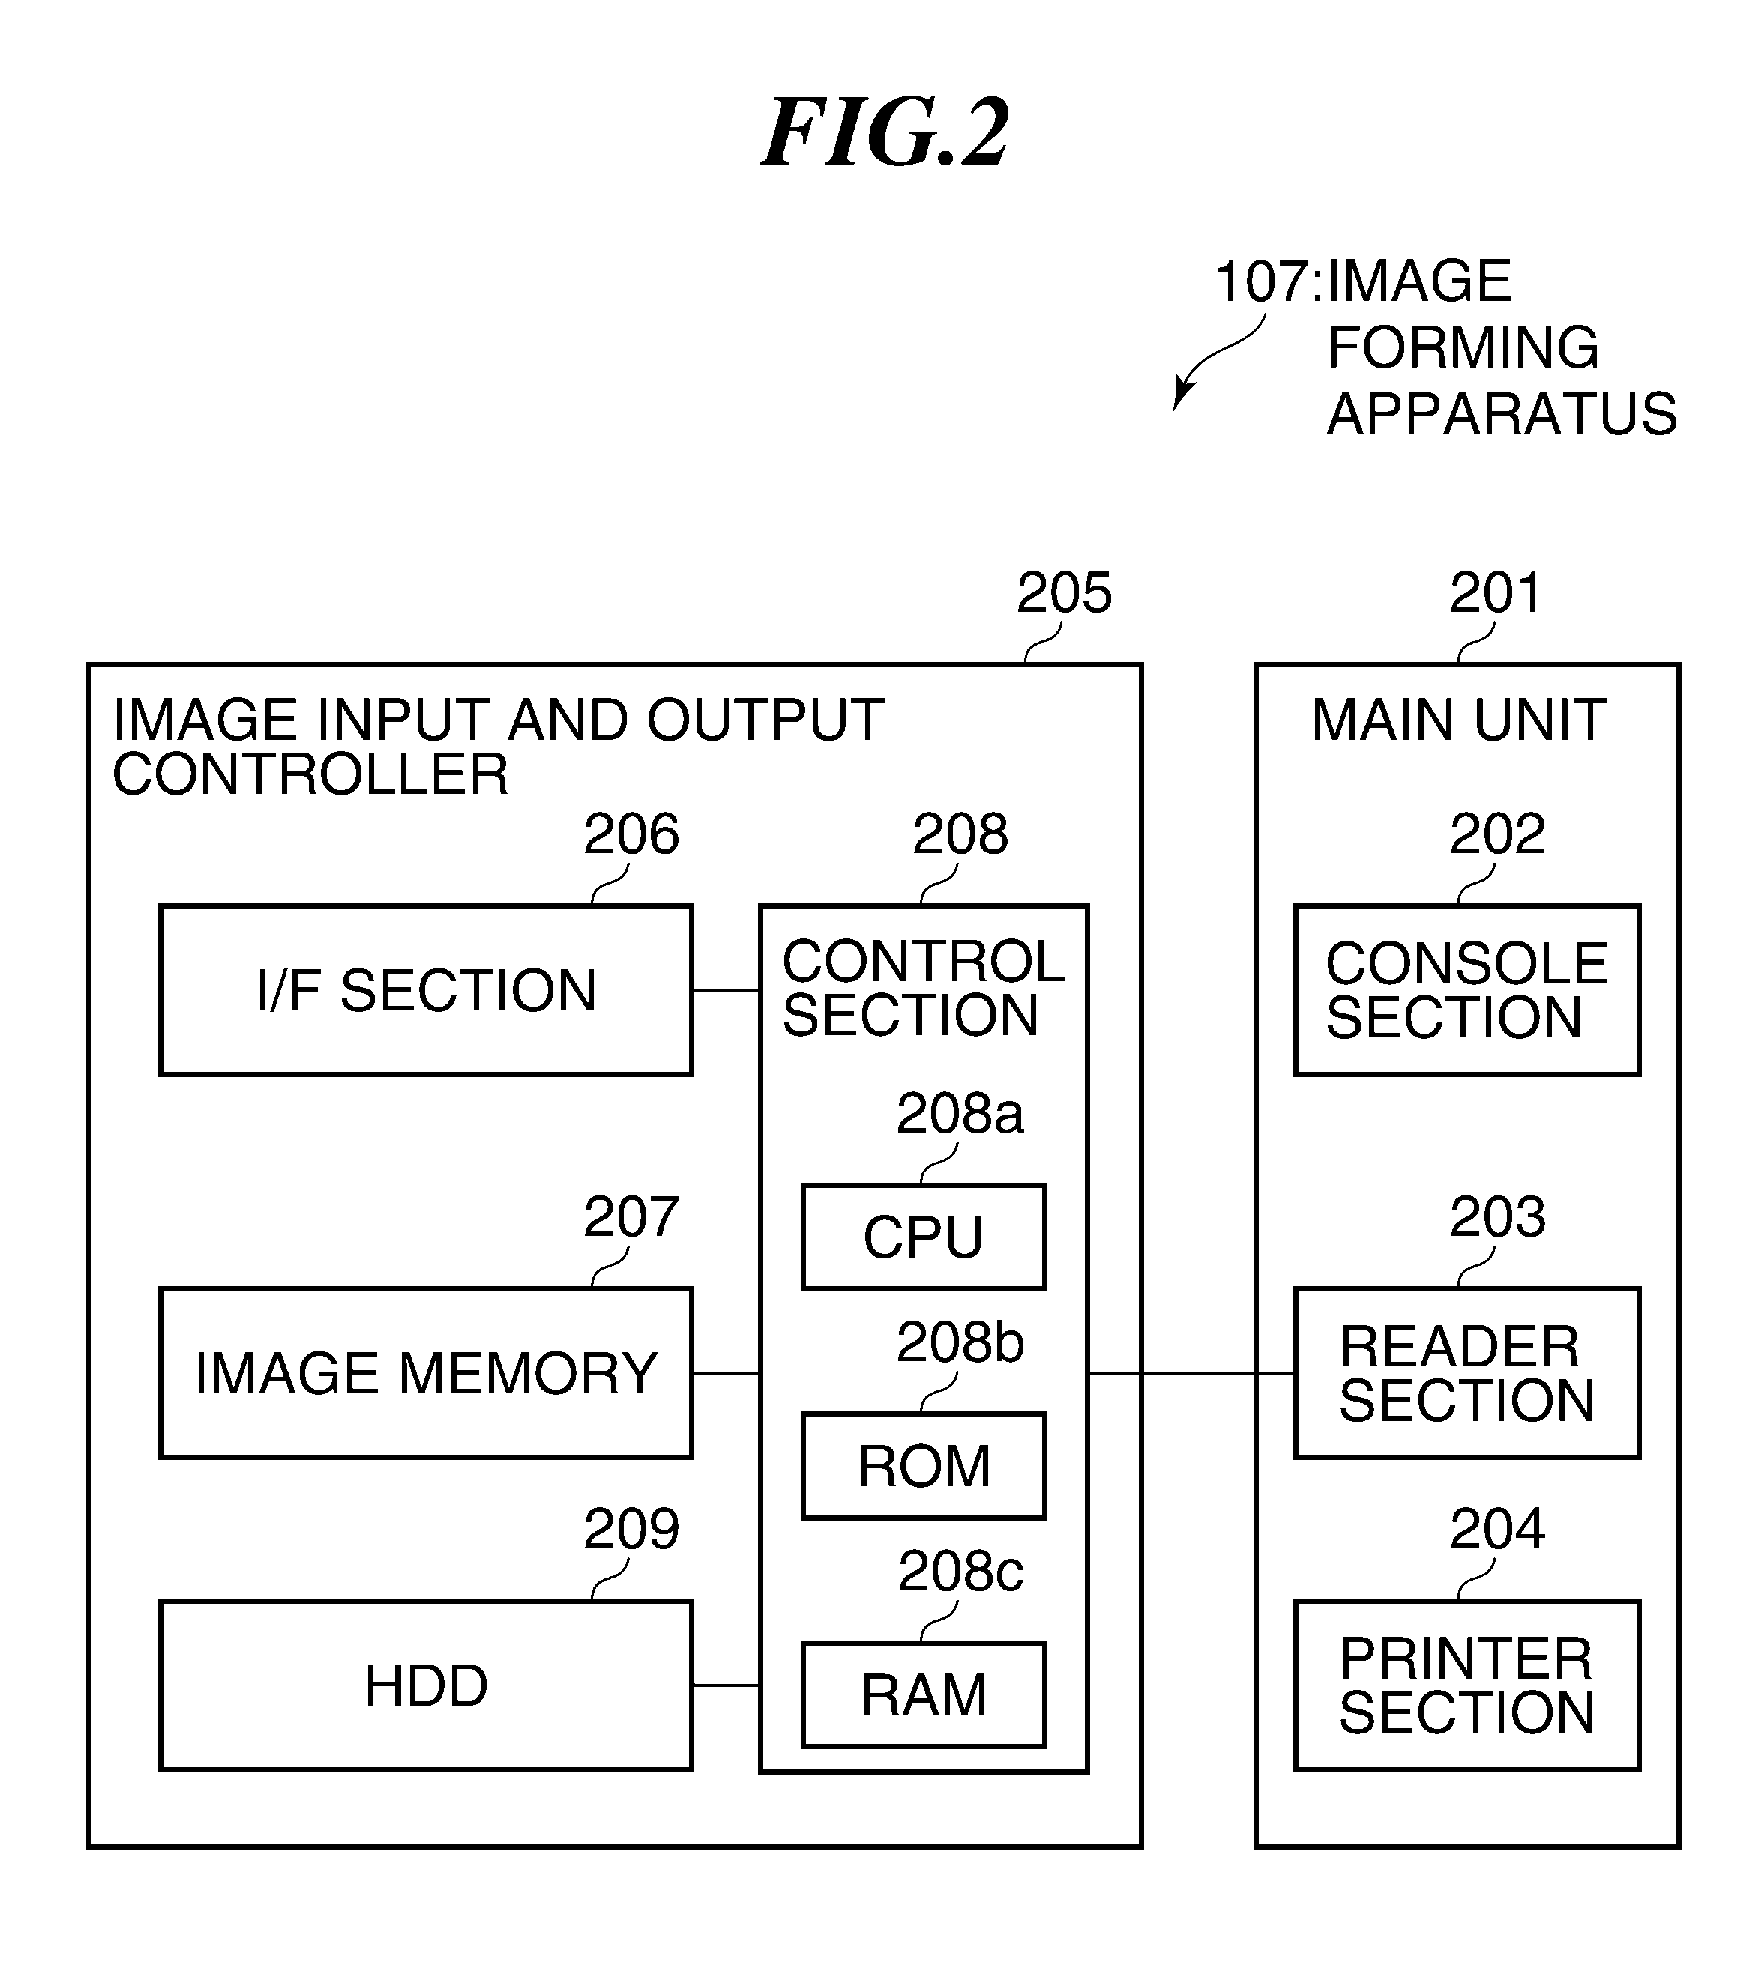 Image forming system including web server, web browser-equipped print control apparatus, and web browser-equipped image forming apparatus, and method of forming image in image forming system